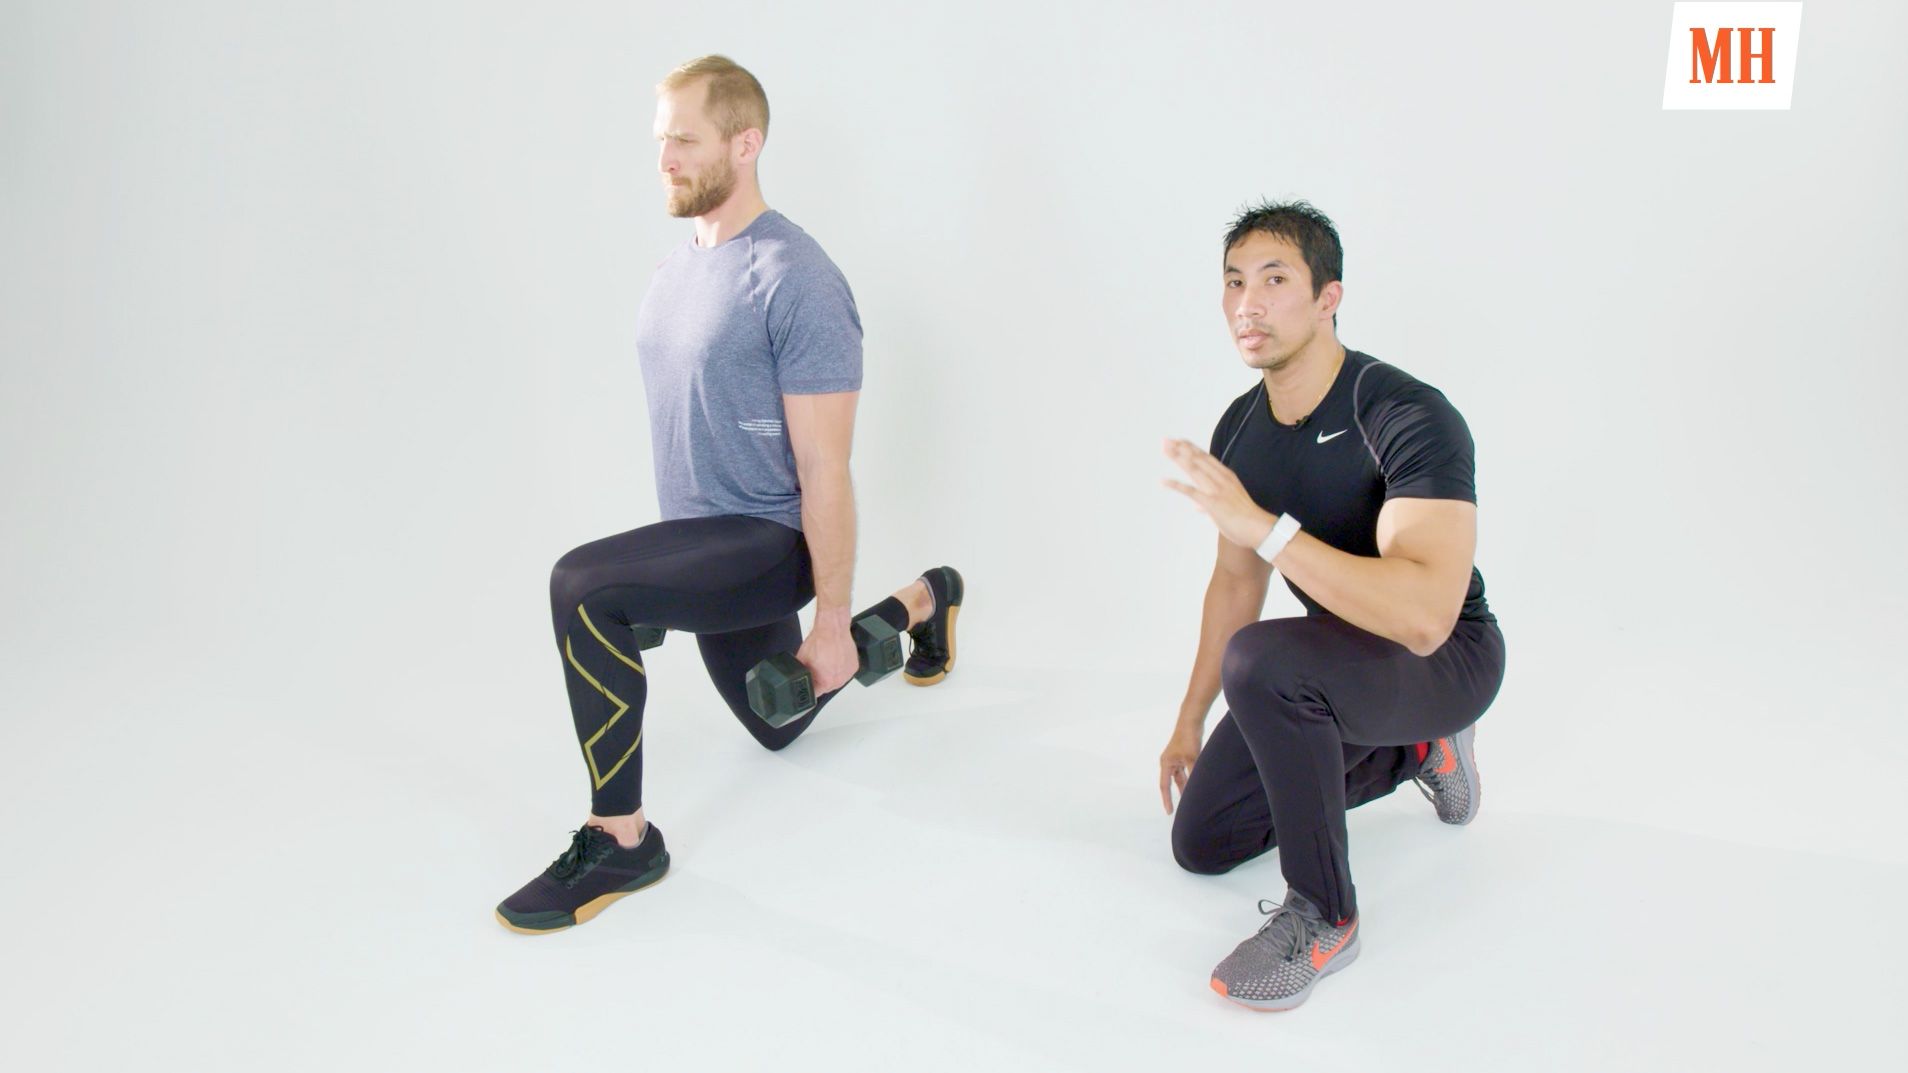 Master High Lunge in 6 Steps